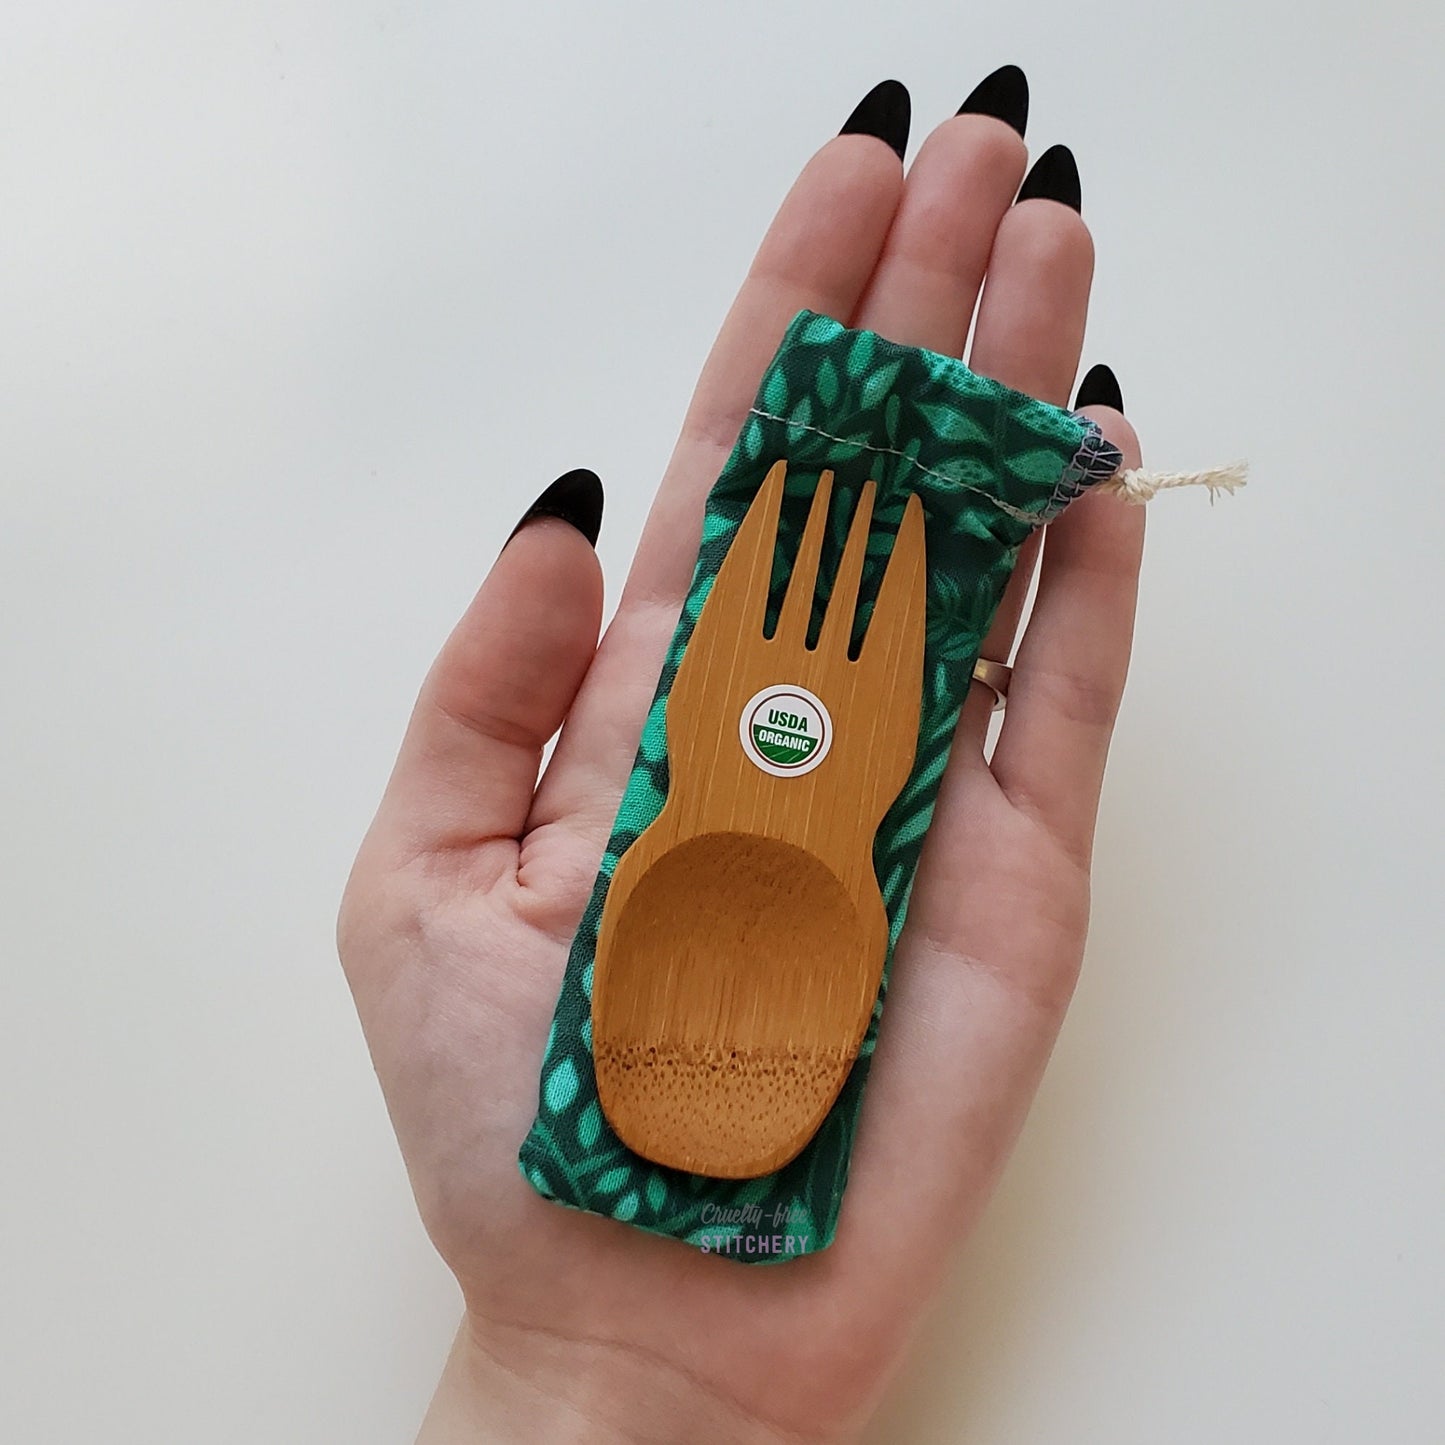 Reusable bamboo spork with pouch. Green with leaves print fabric pouch with bamboo spork on top, laid on a hand for size reference. The spork is slightly longer than the fingers.